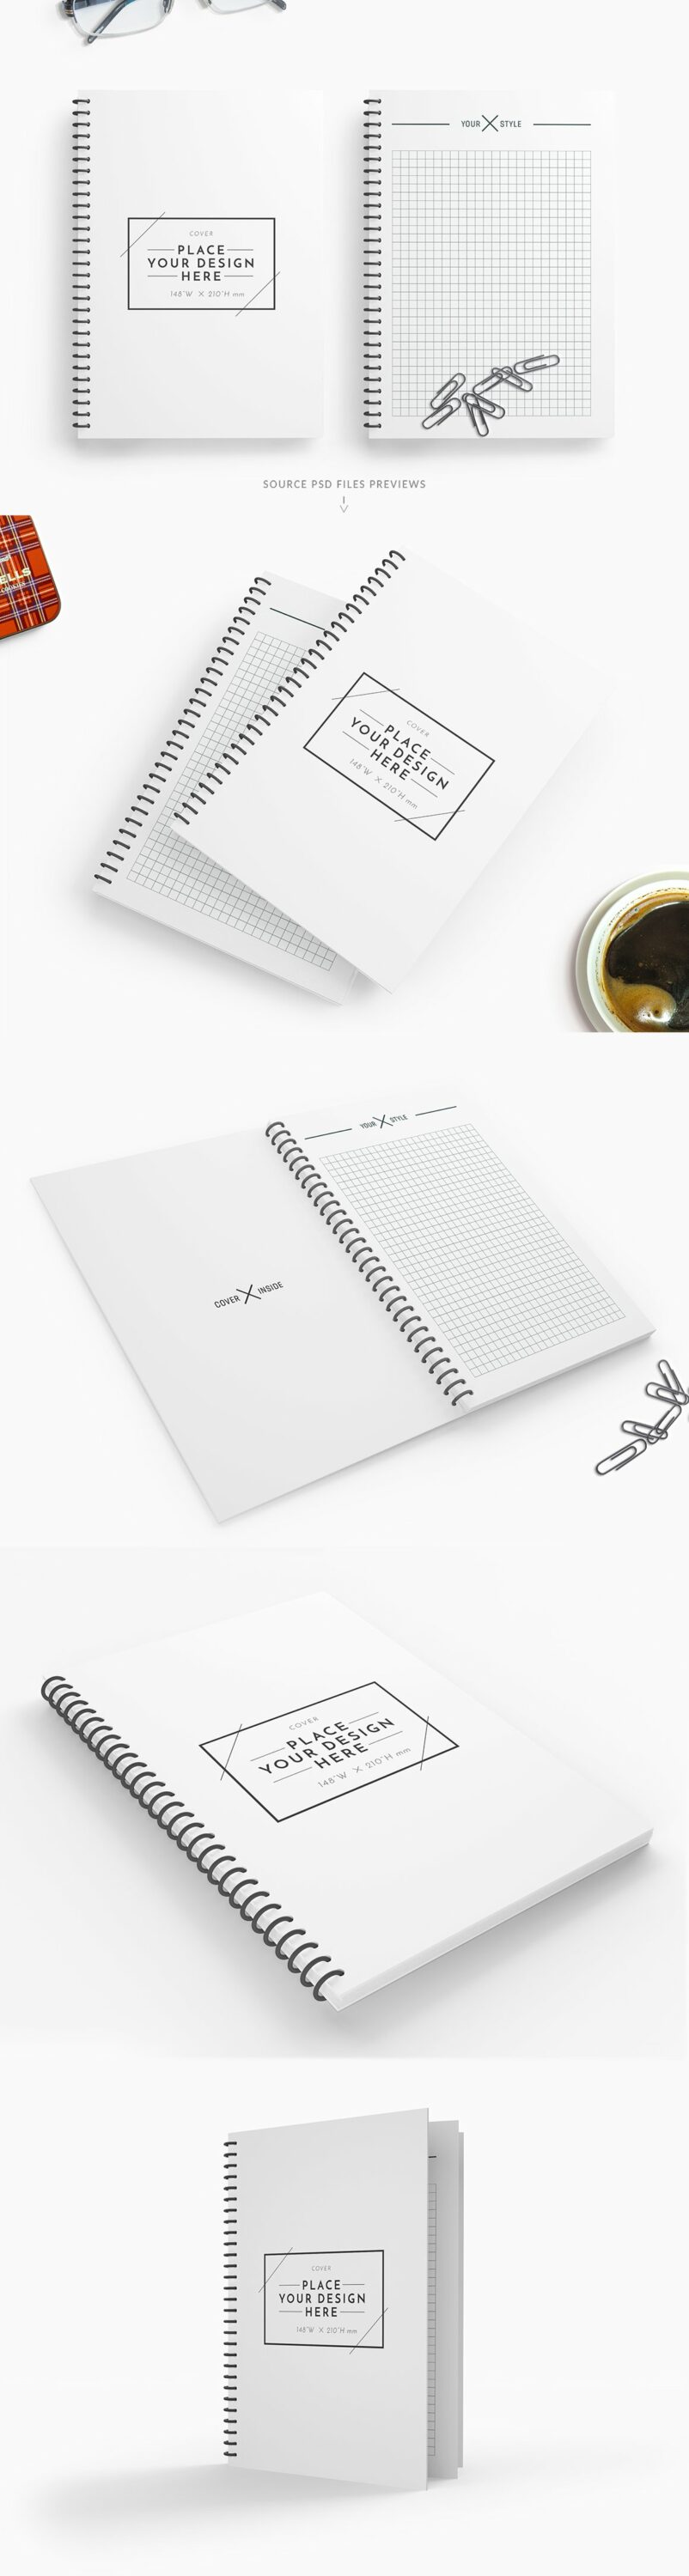 Collection of A5 notepad images with amazing design.